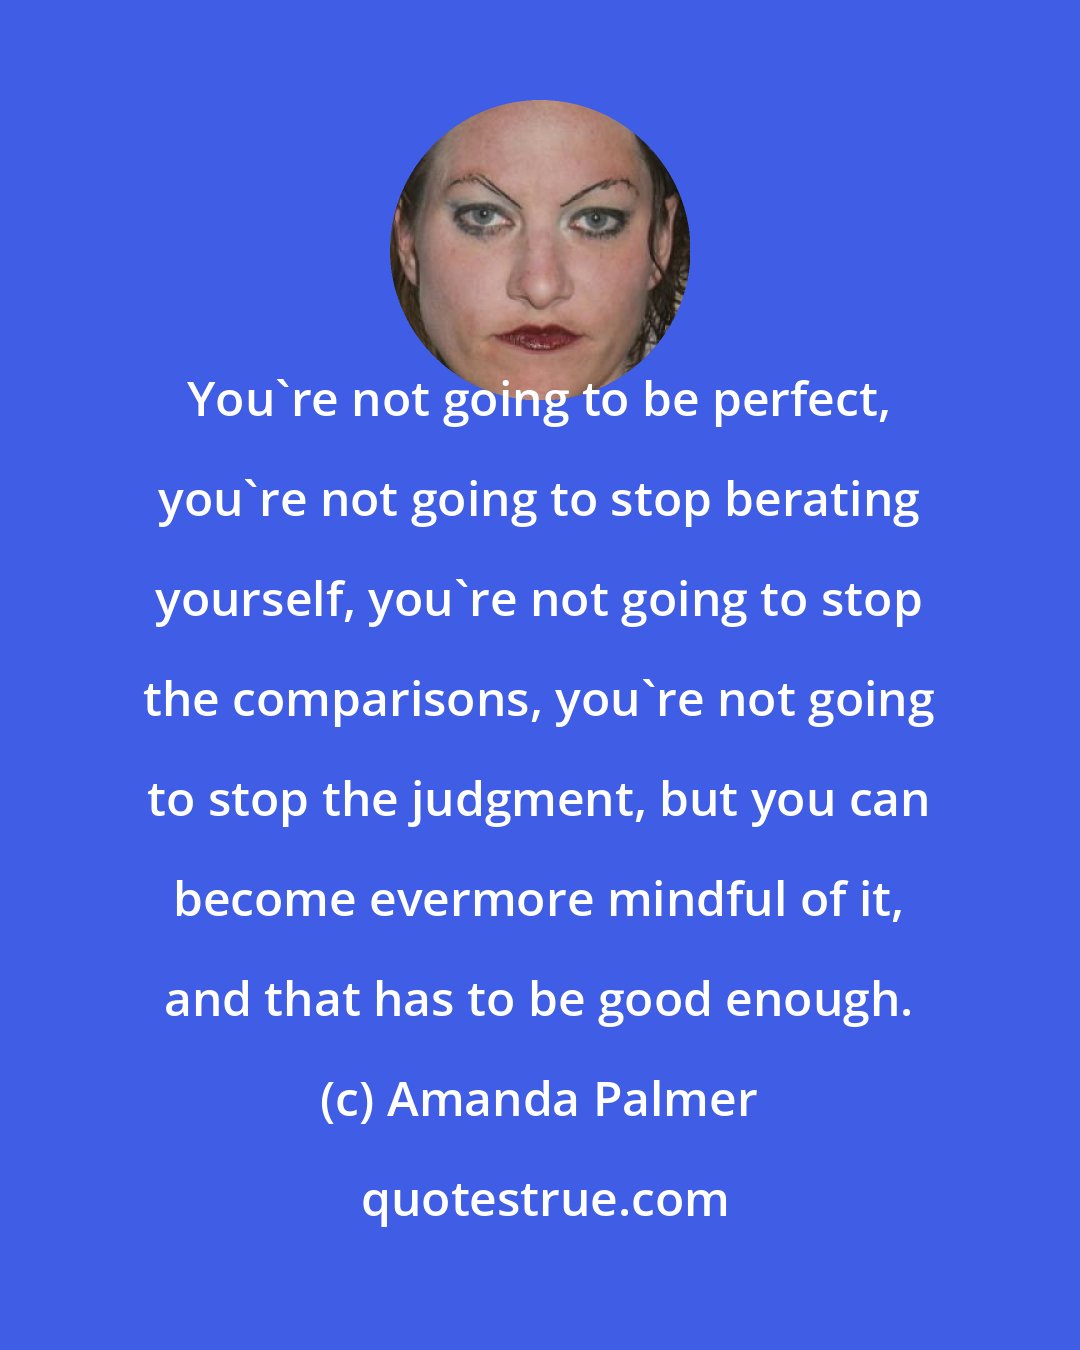 Amanda Palmer: You're not going to be perfect, you're not going to stop berating yourself, you're not going to stop the comparisons, you're not going to stop the judgment, but you can become evermore mindful of it, and that has to be good enough.